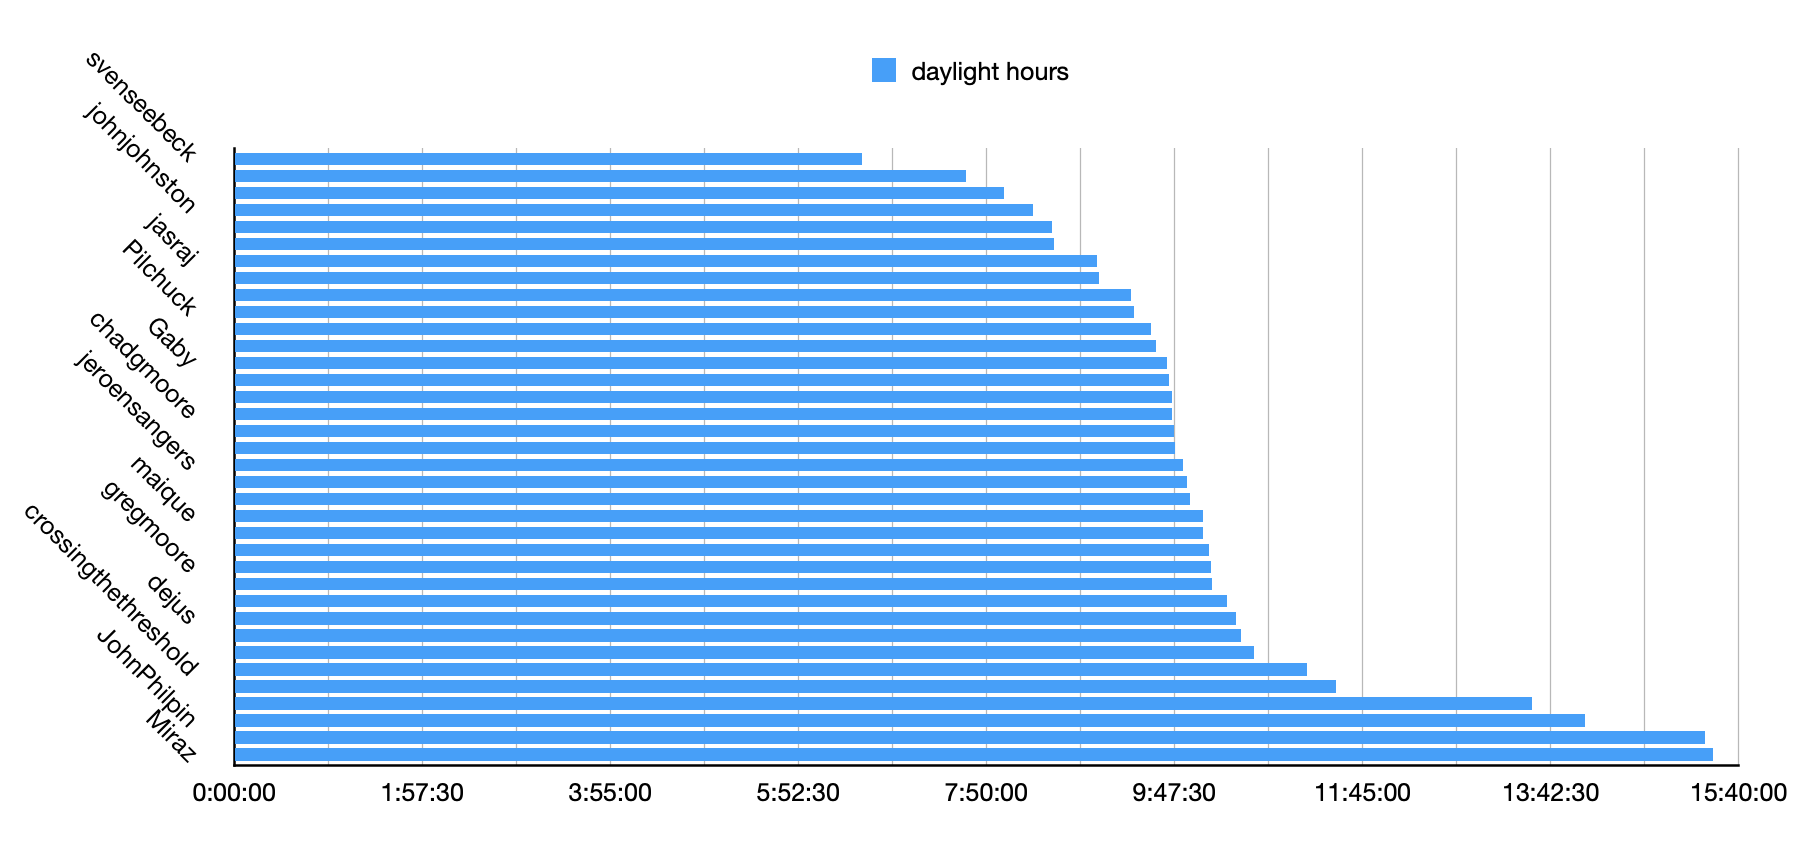 Graph of daylight hours length from participants. 